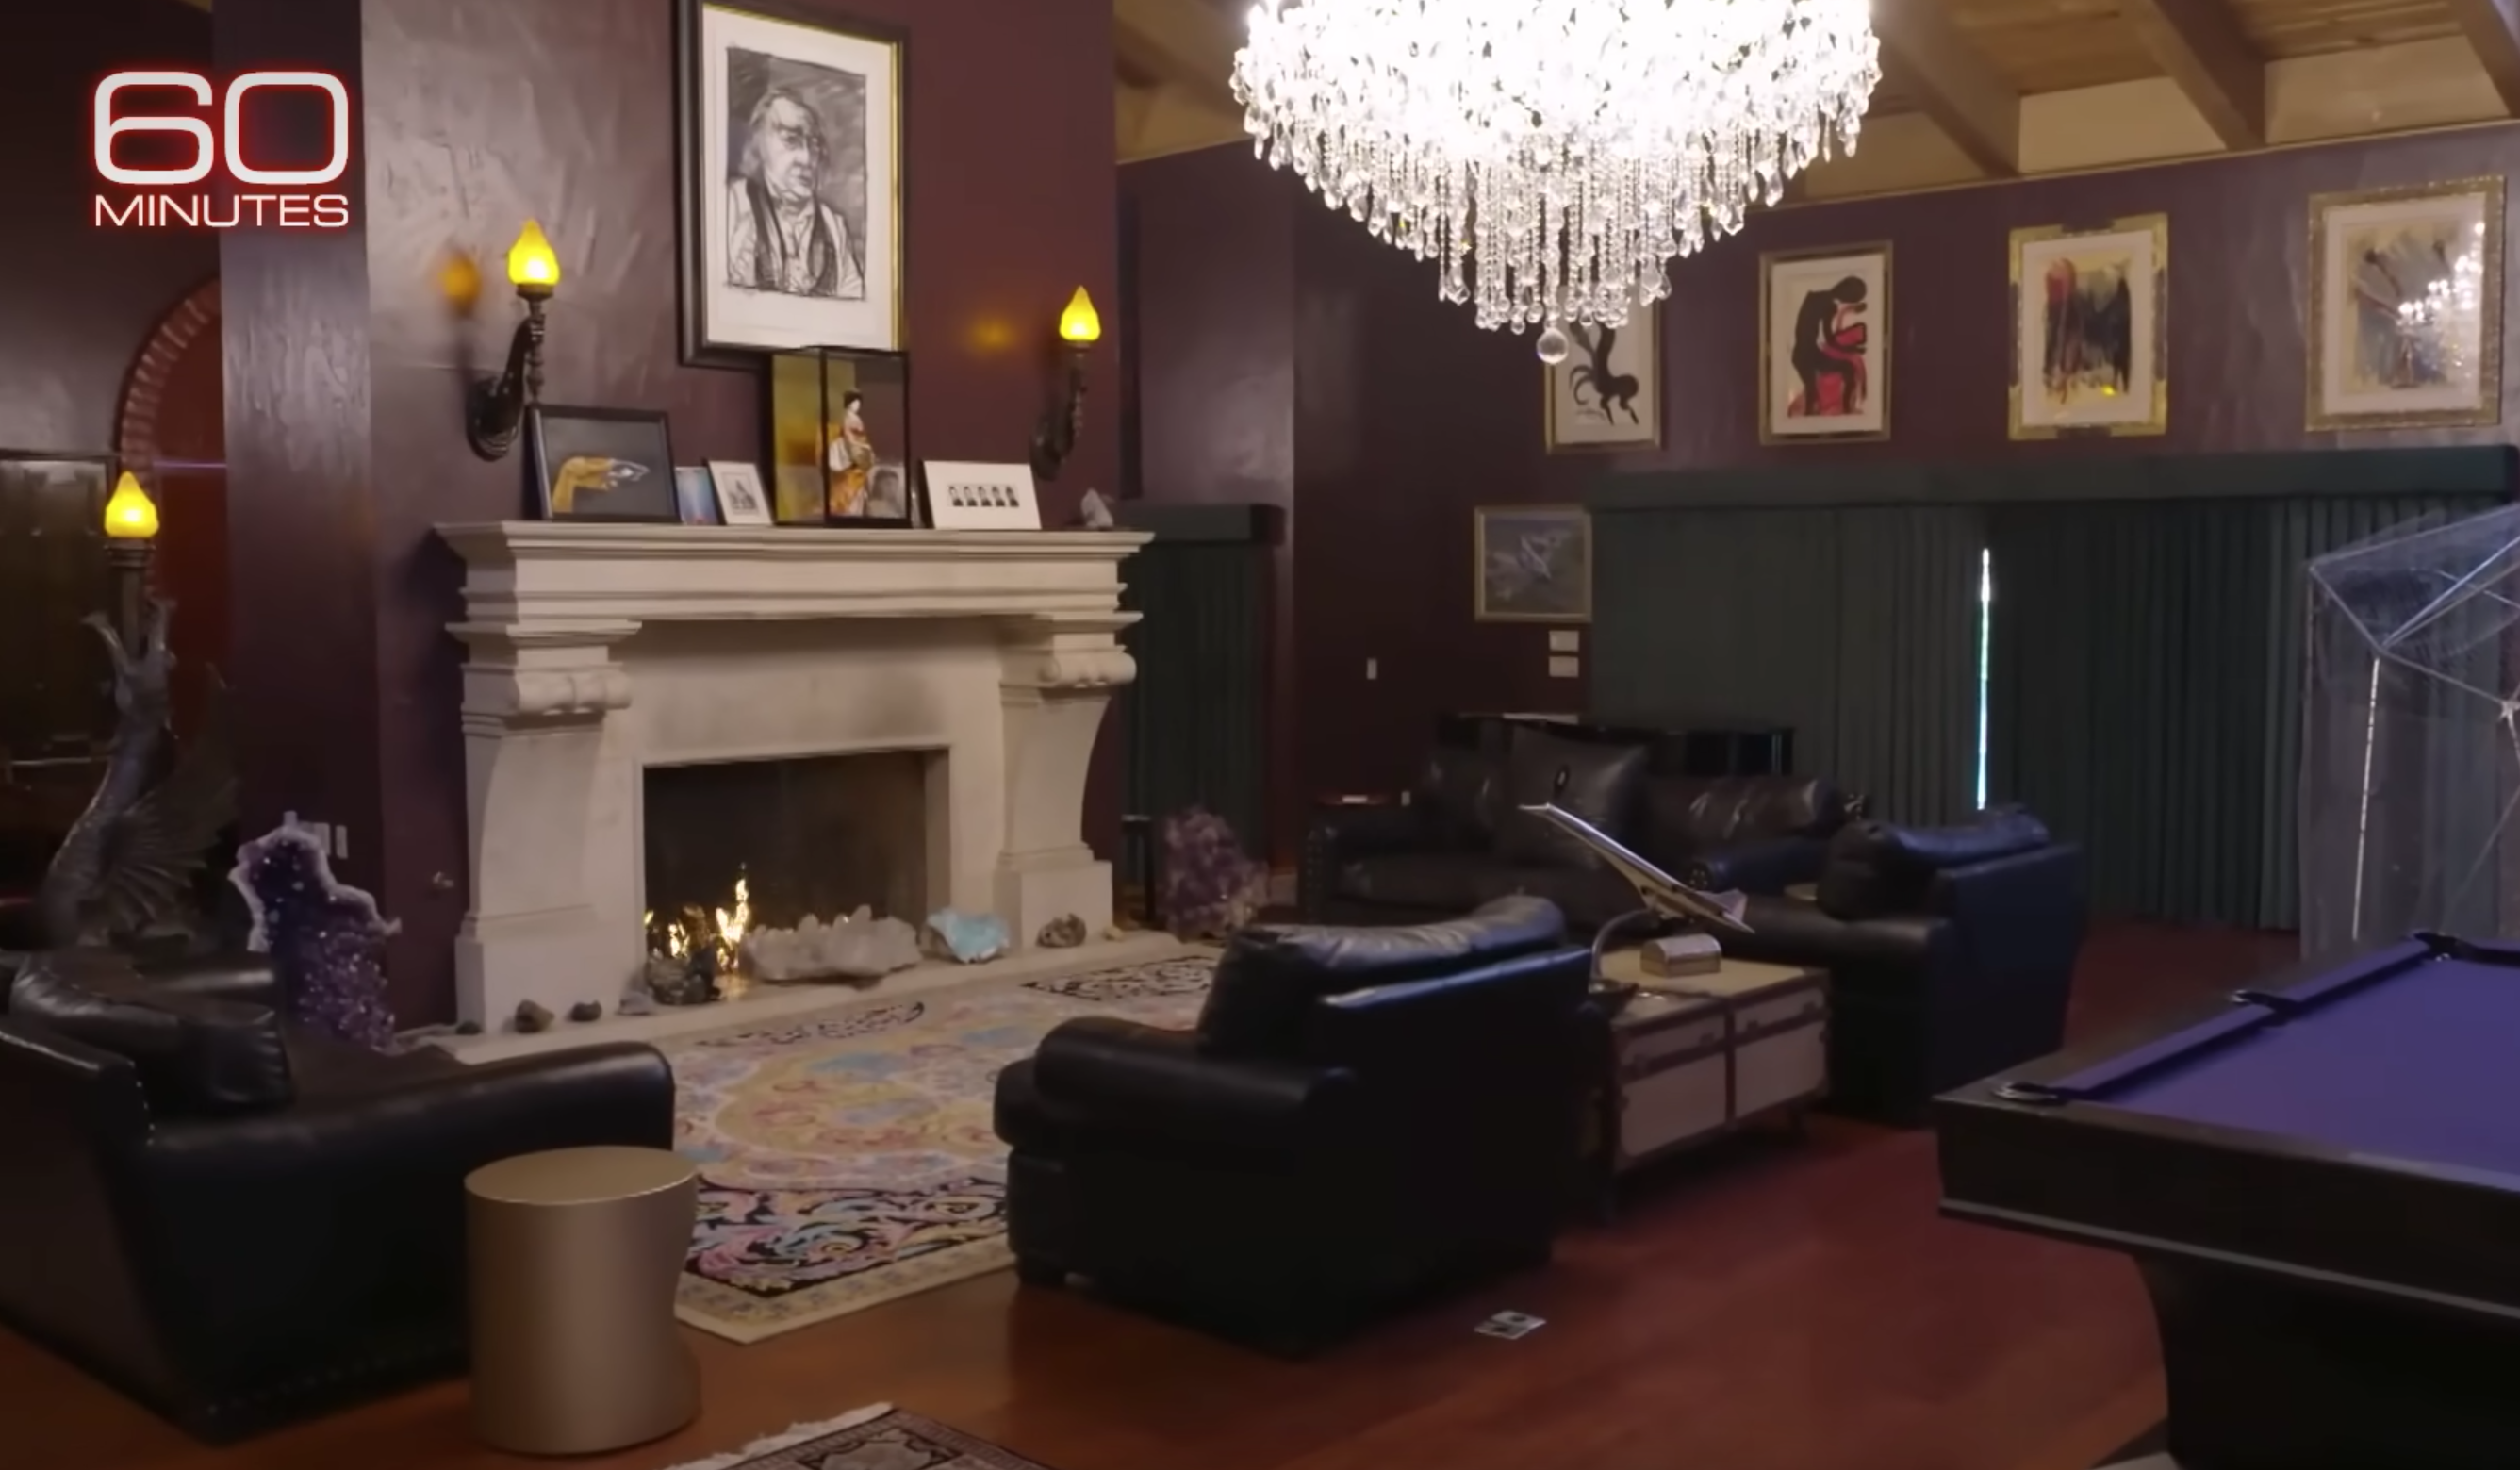 Cage's living room. | Source: YouTube.com/60 Minutes